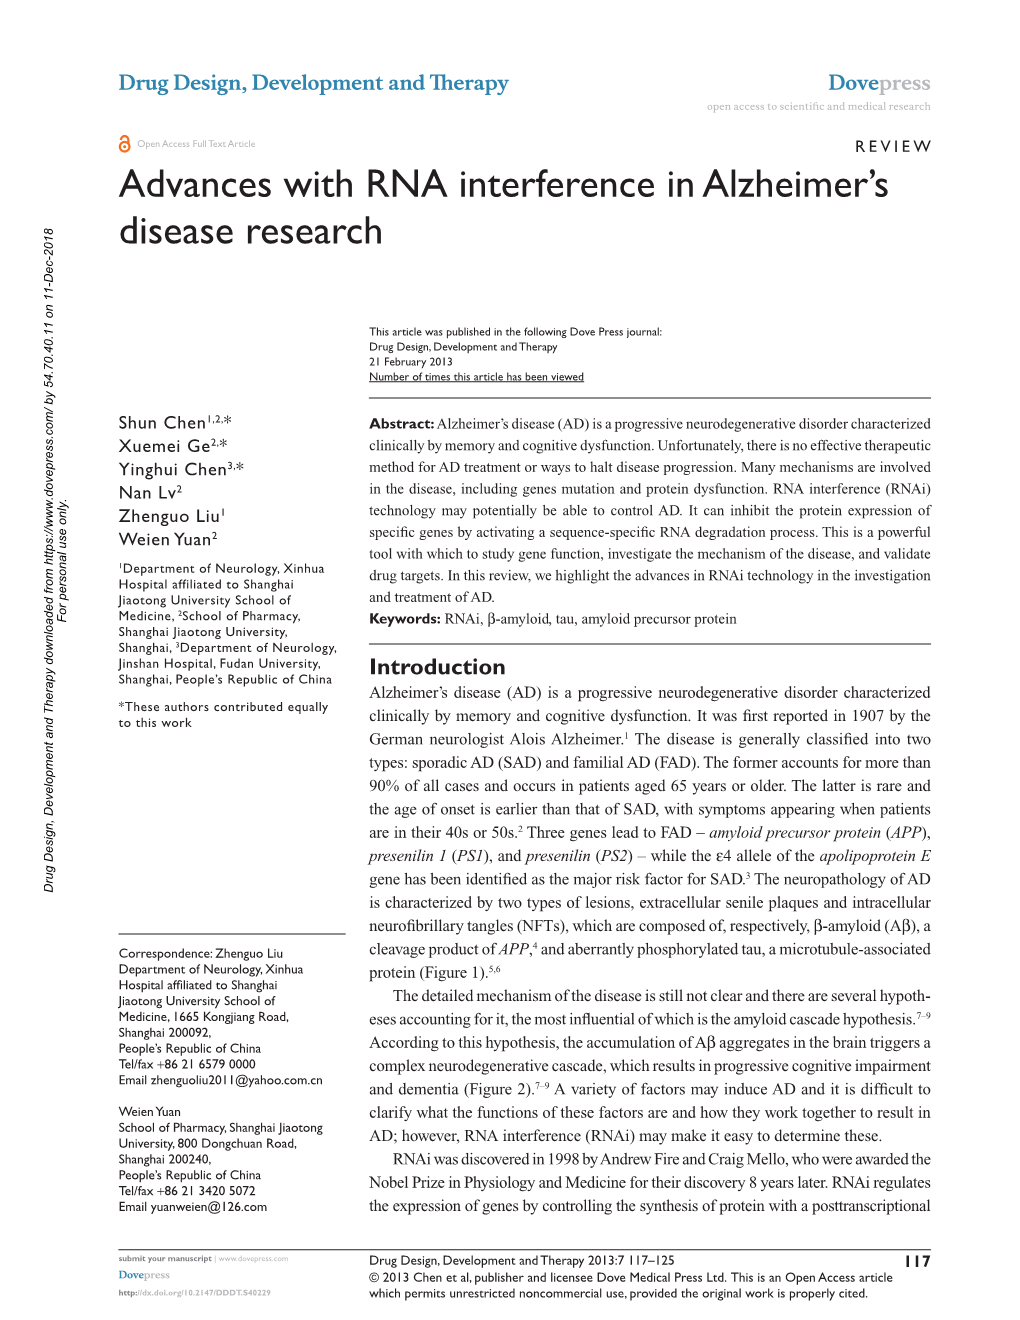 Advances with RNA Interference in Alzheimer's Disease Research